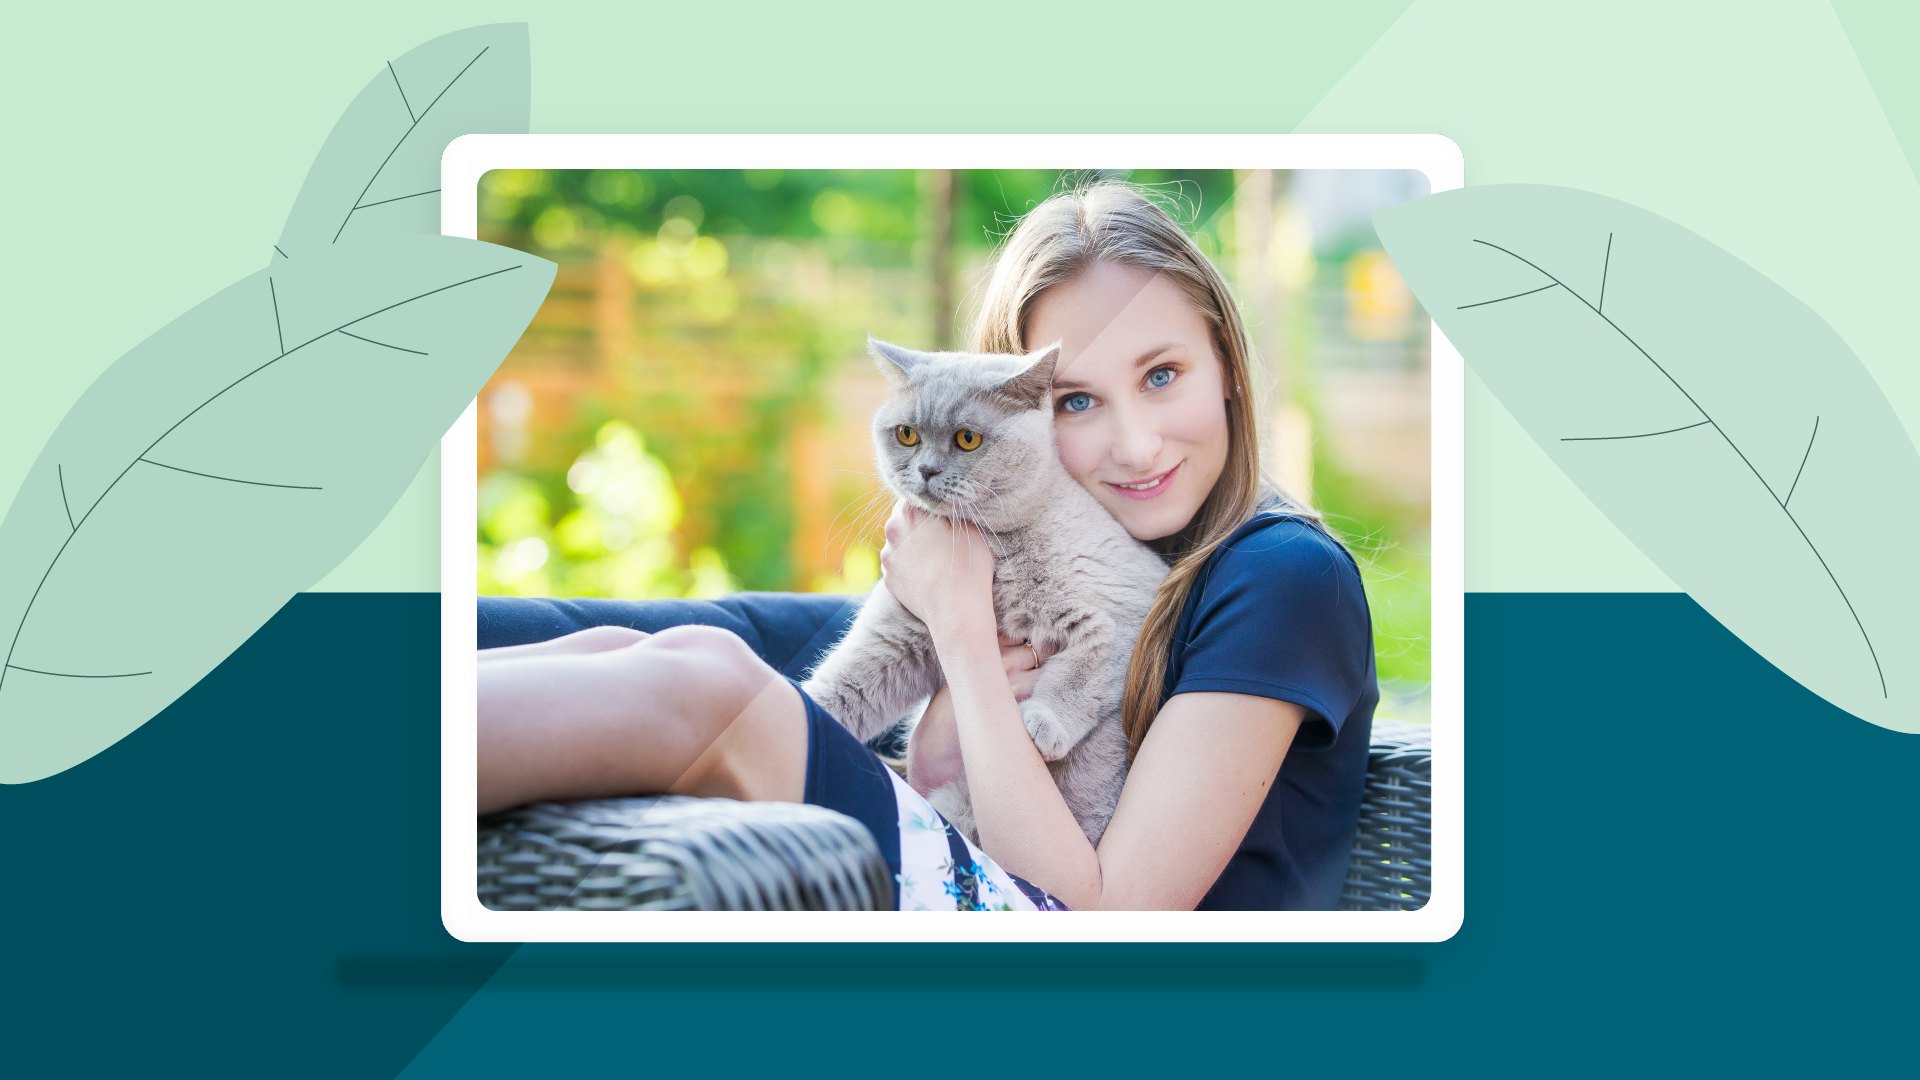 A young woman holding a cat.